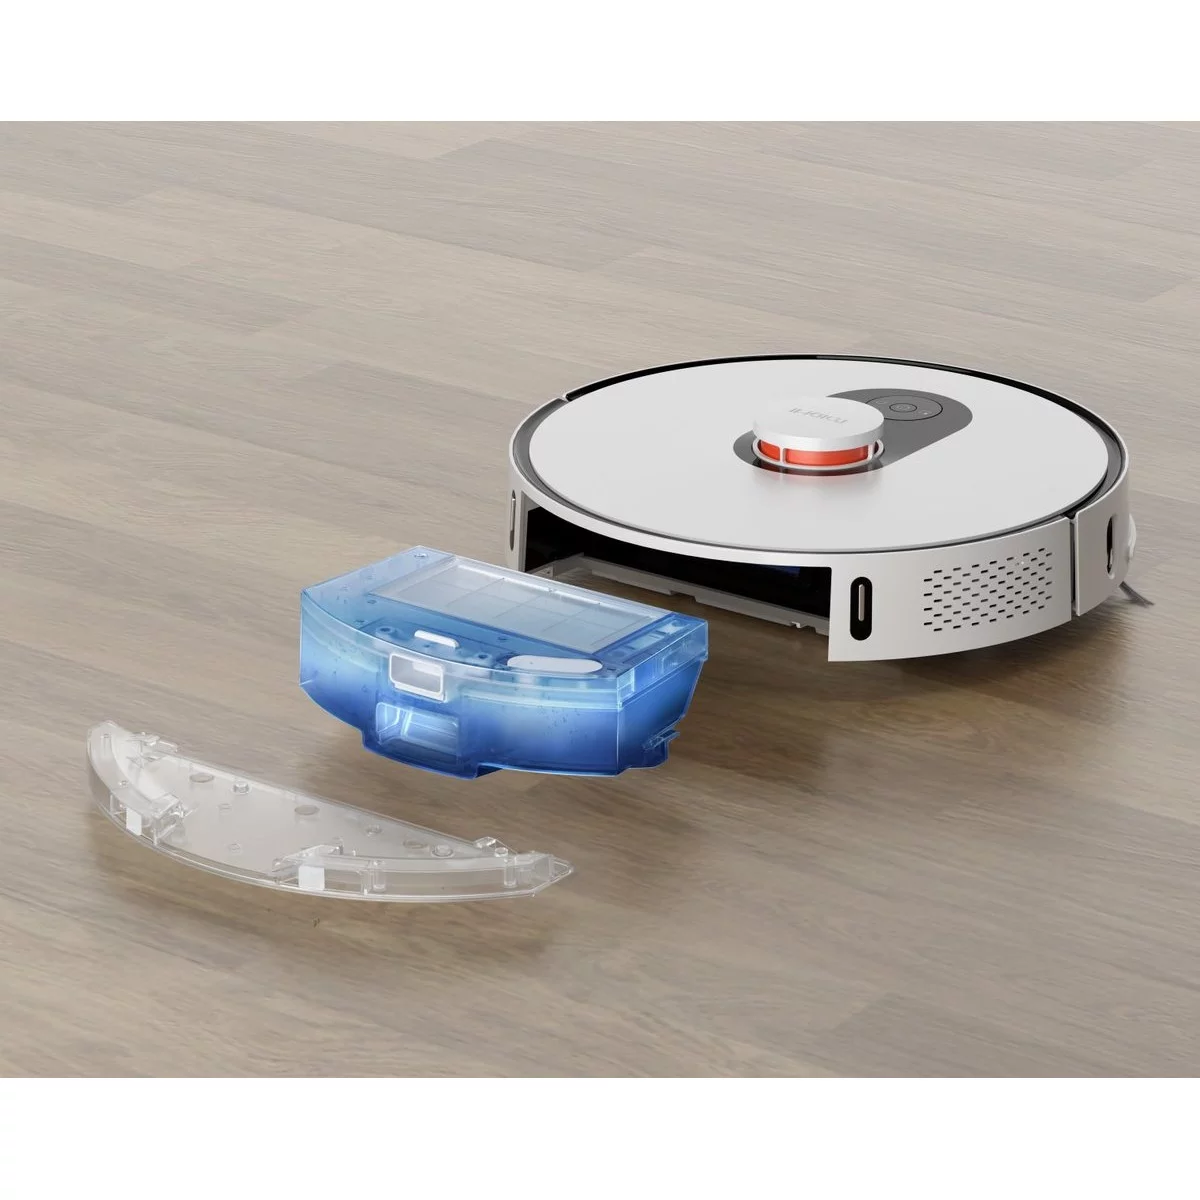 Детский робот пылесос. Робот-пылесос Roidmi Eve Plus Robot Vacuum and Mop Cleaner with Cleaning Base. Робот-пылесос Roidmi Eve Plus Robot Vacuum and Mop Cleaner White. Робот-пылесос Roidmi Eve Plus eu. Робот-пылесос Xiaomi Roidmi Eve Plus Robot Vacuum.